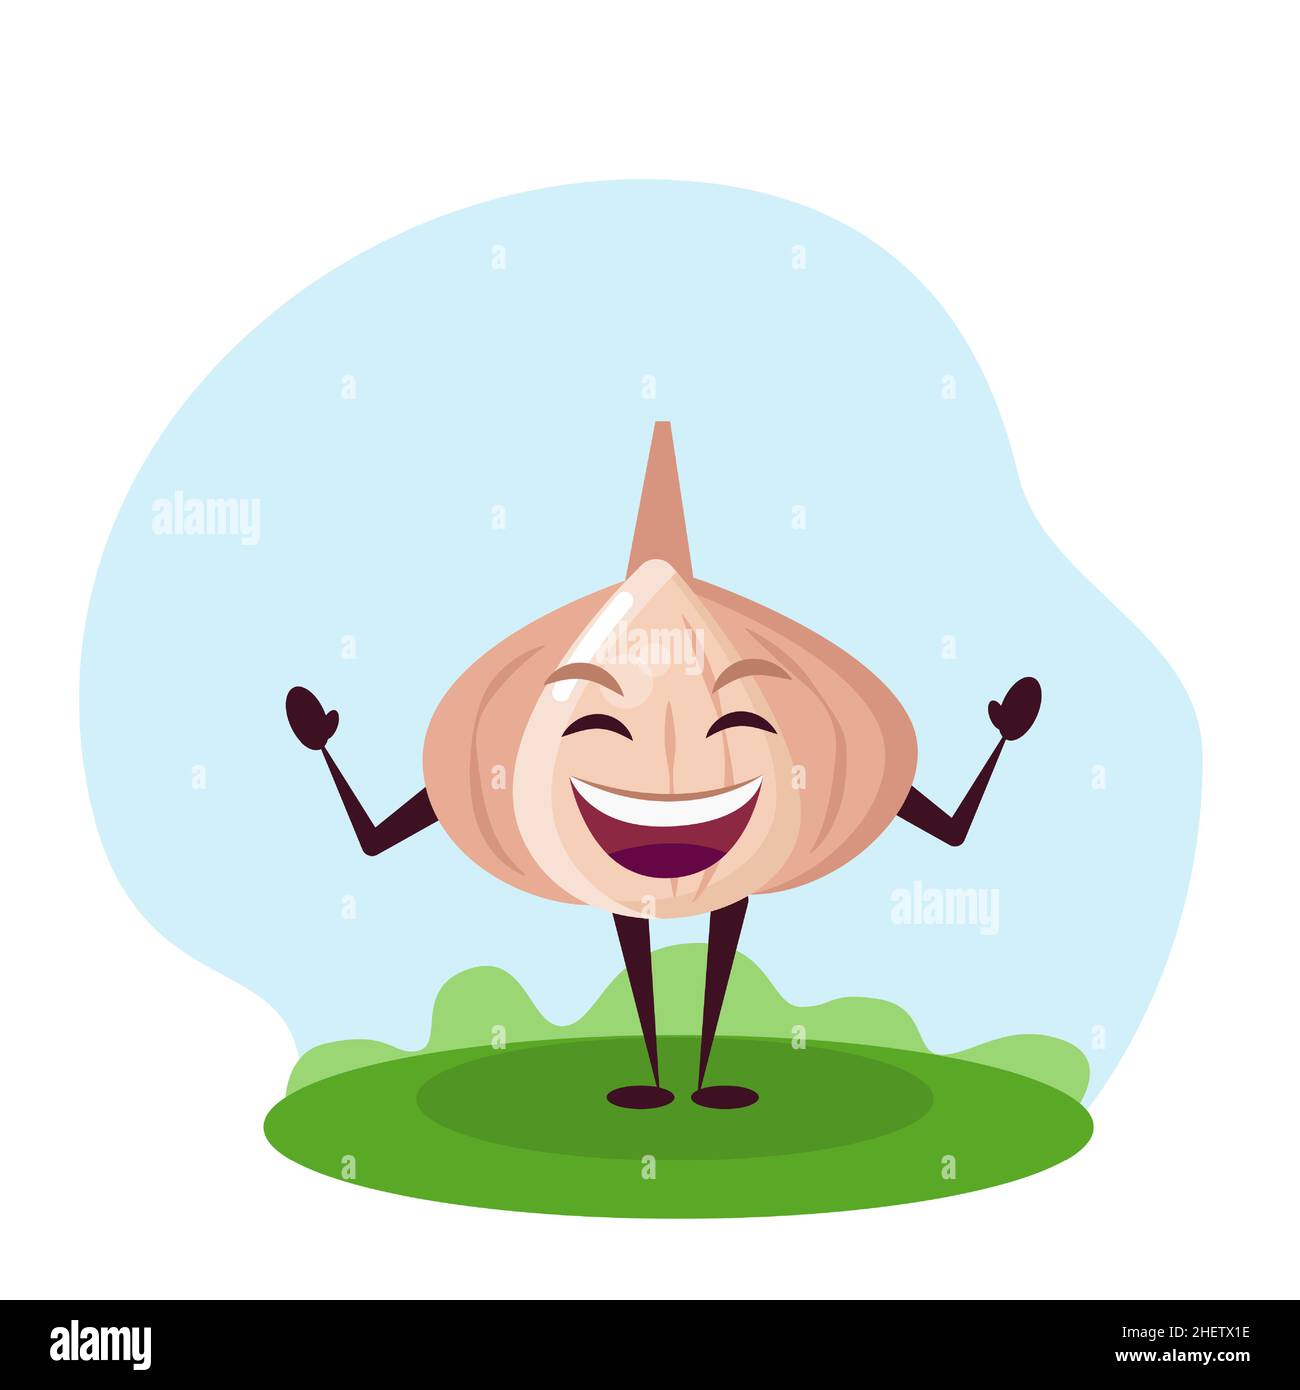 Funny garlic character. Vector illustration in cartoon style for children. Stock Vector